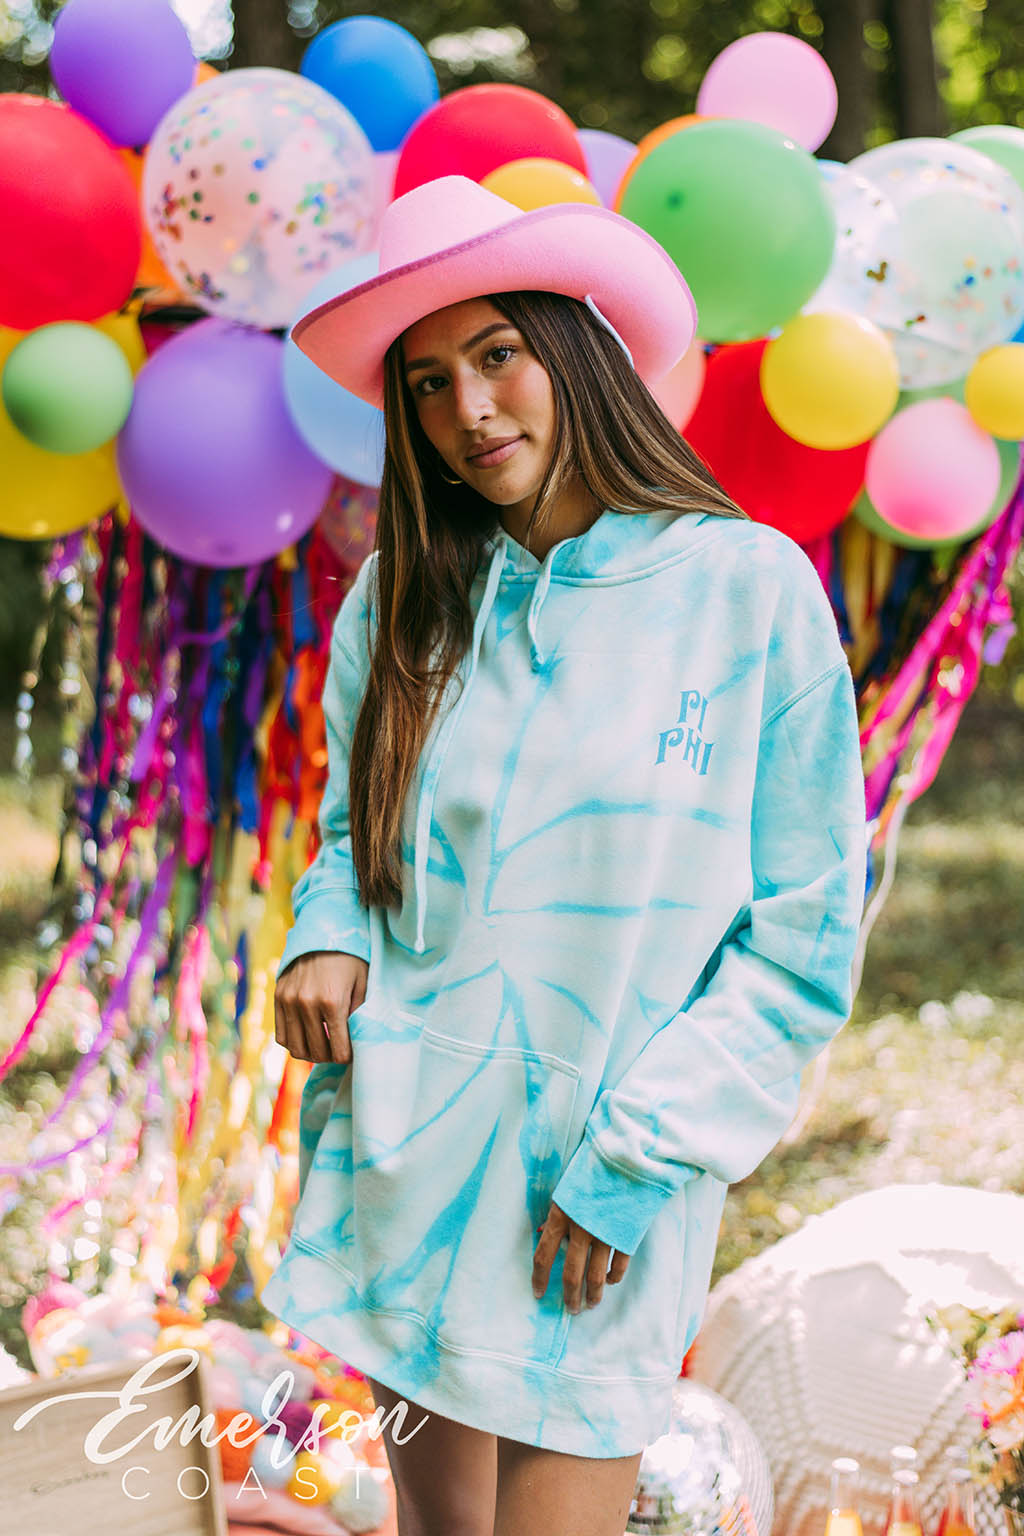 All You Need is Pi Phi Easy Breeze Hoodie